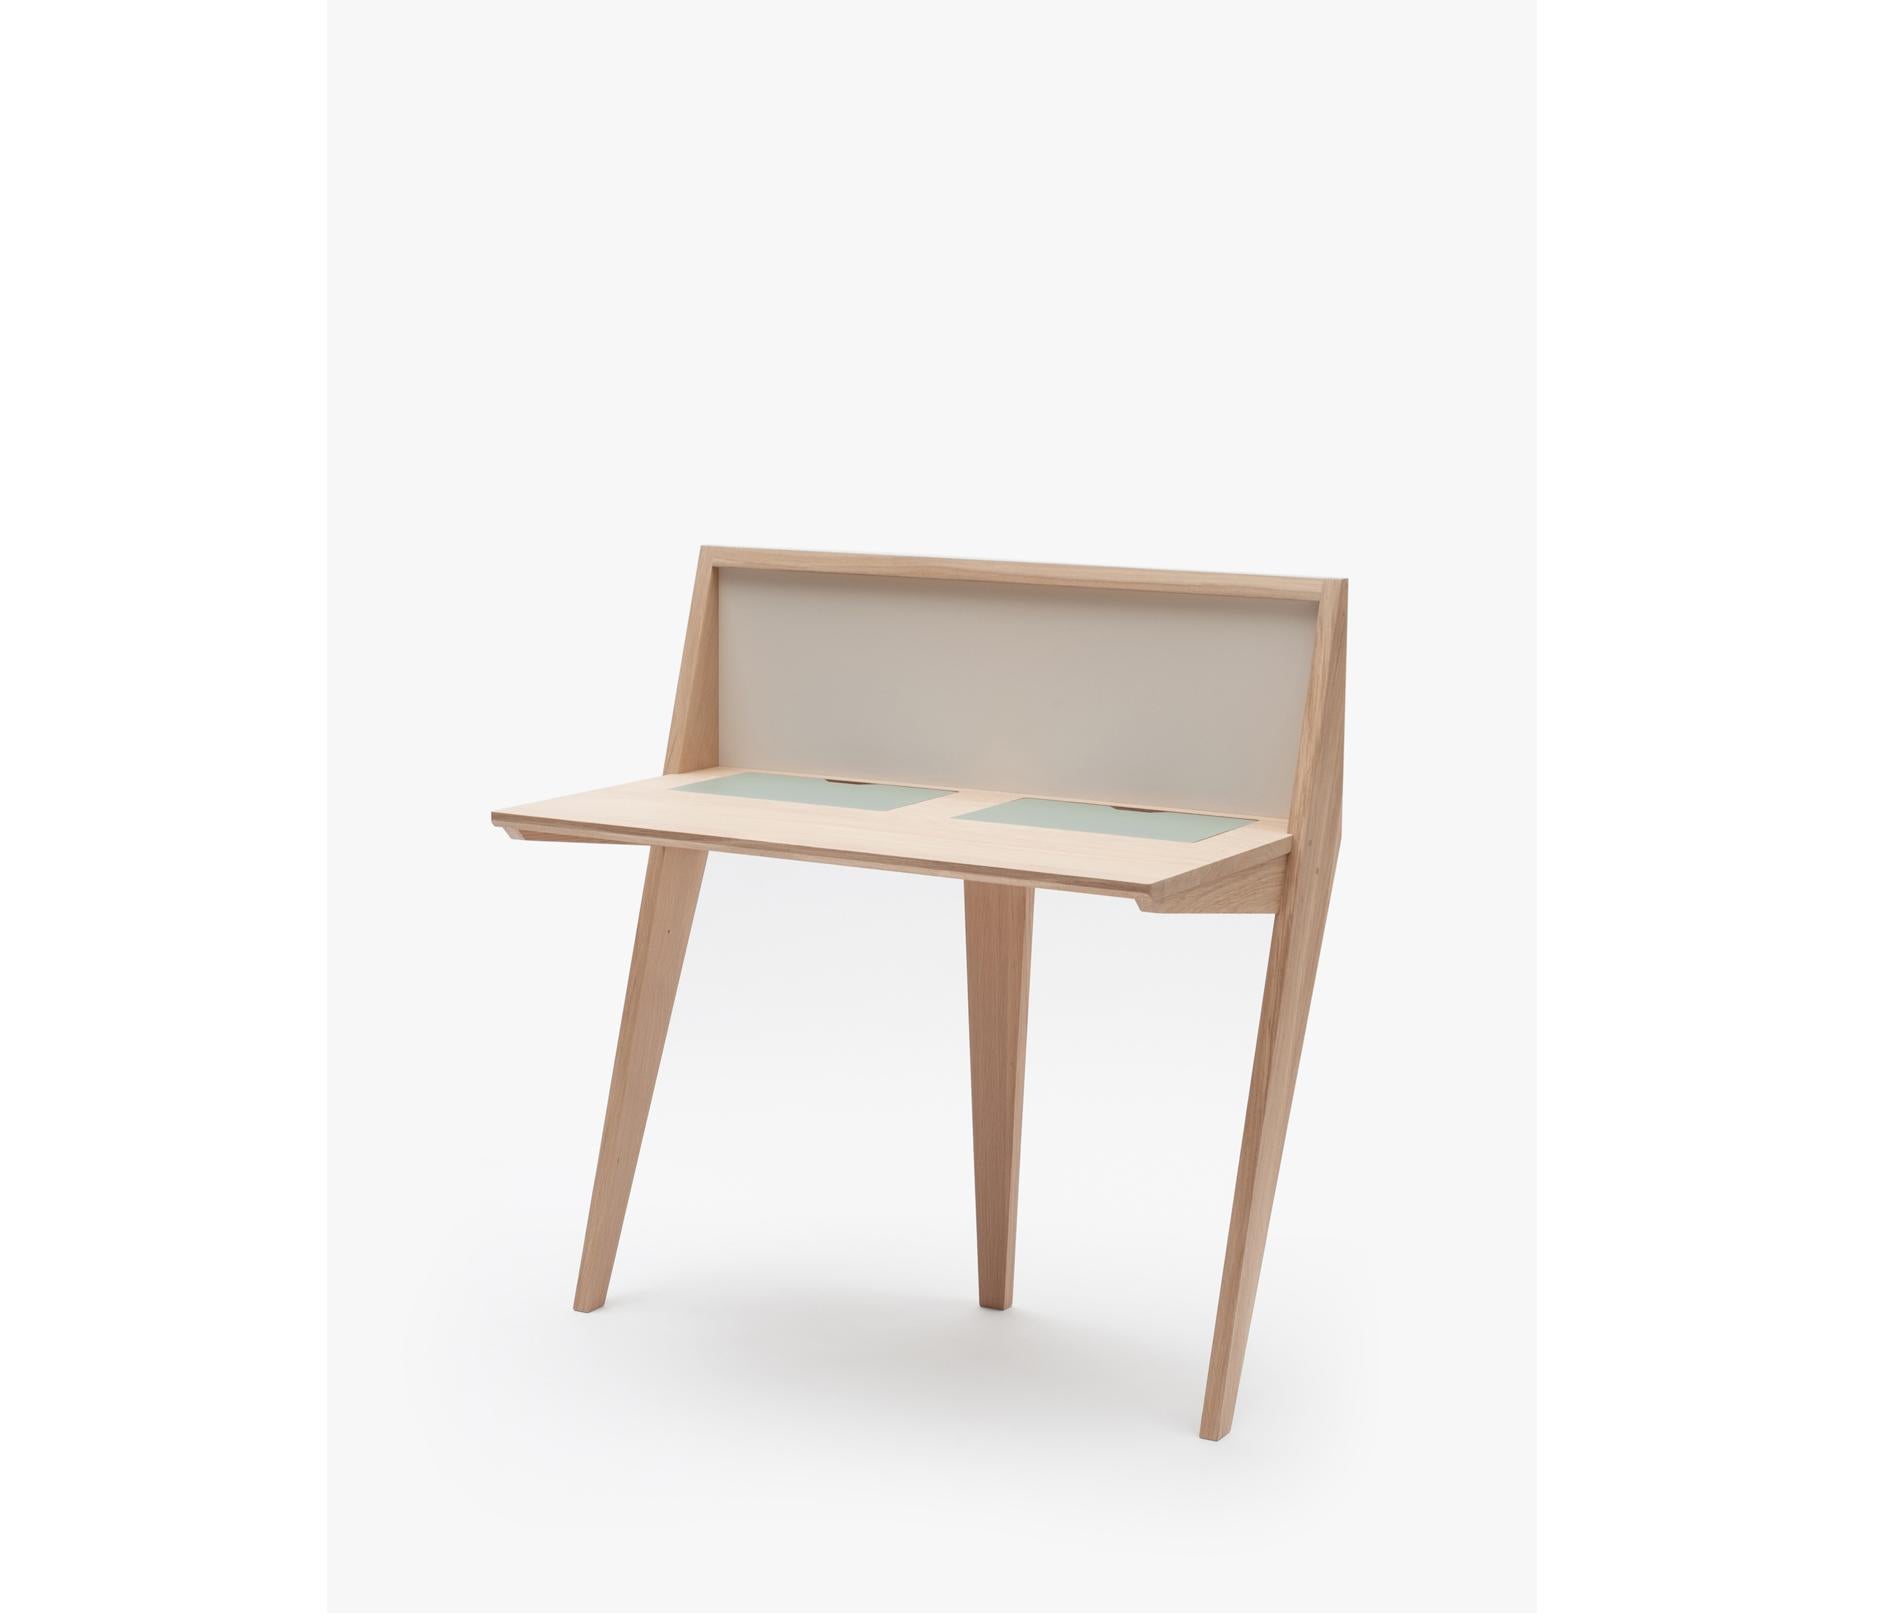 Leaning against the wall, the COMPAS desk is ideal for small places. Simple lines, original design and still so functional: 2 removable flaps giving access to storage space for computer tablets, paper, pencils. It features also a USB port and a